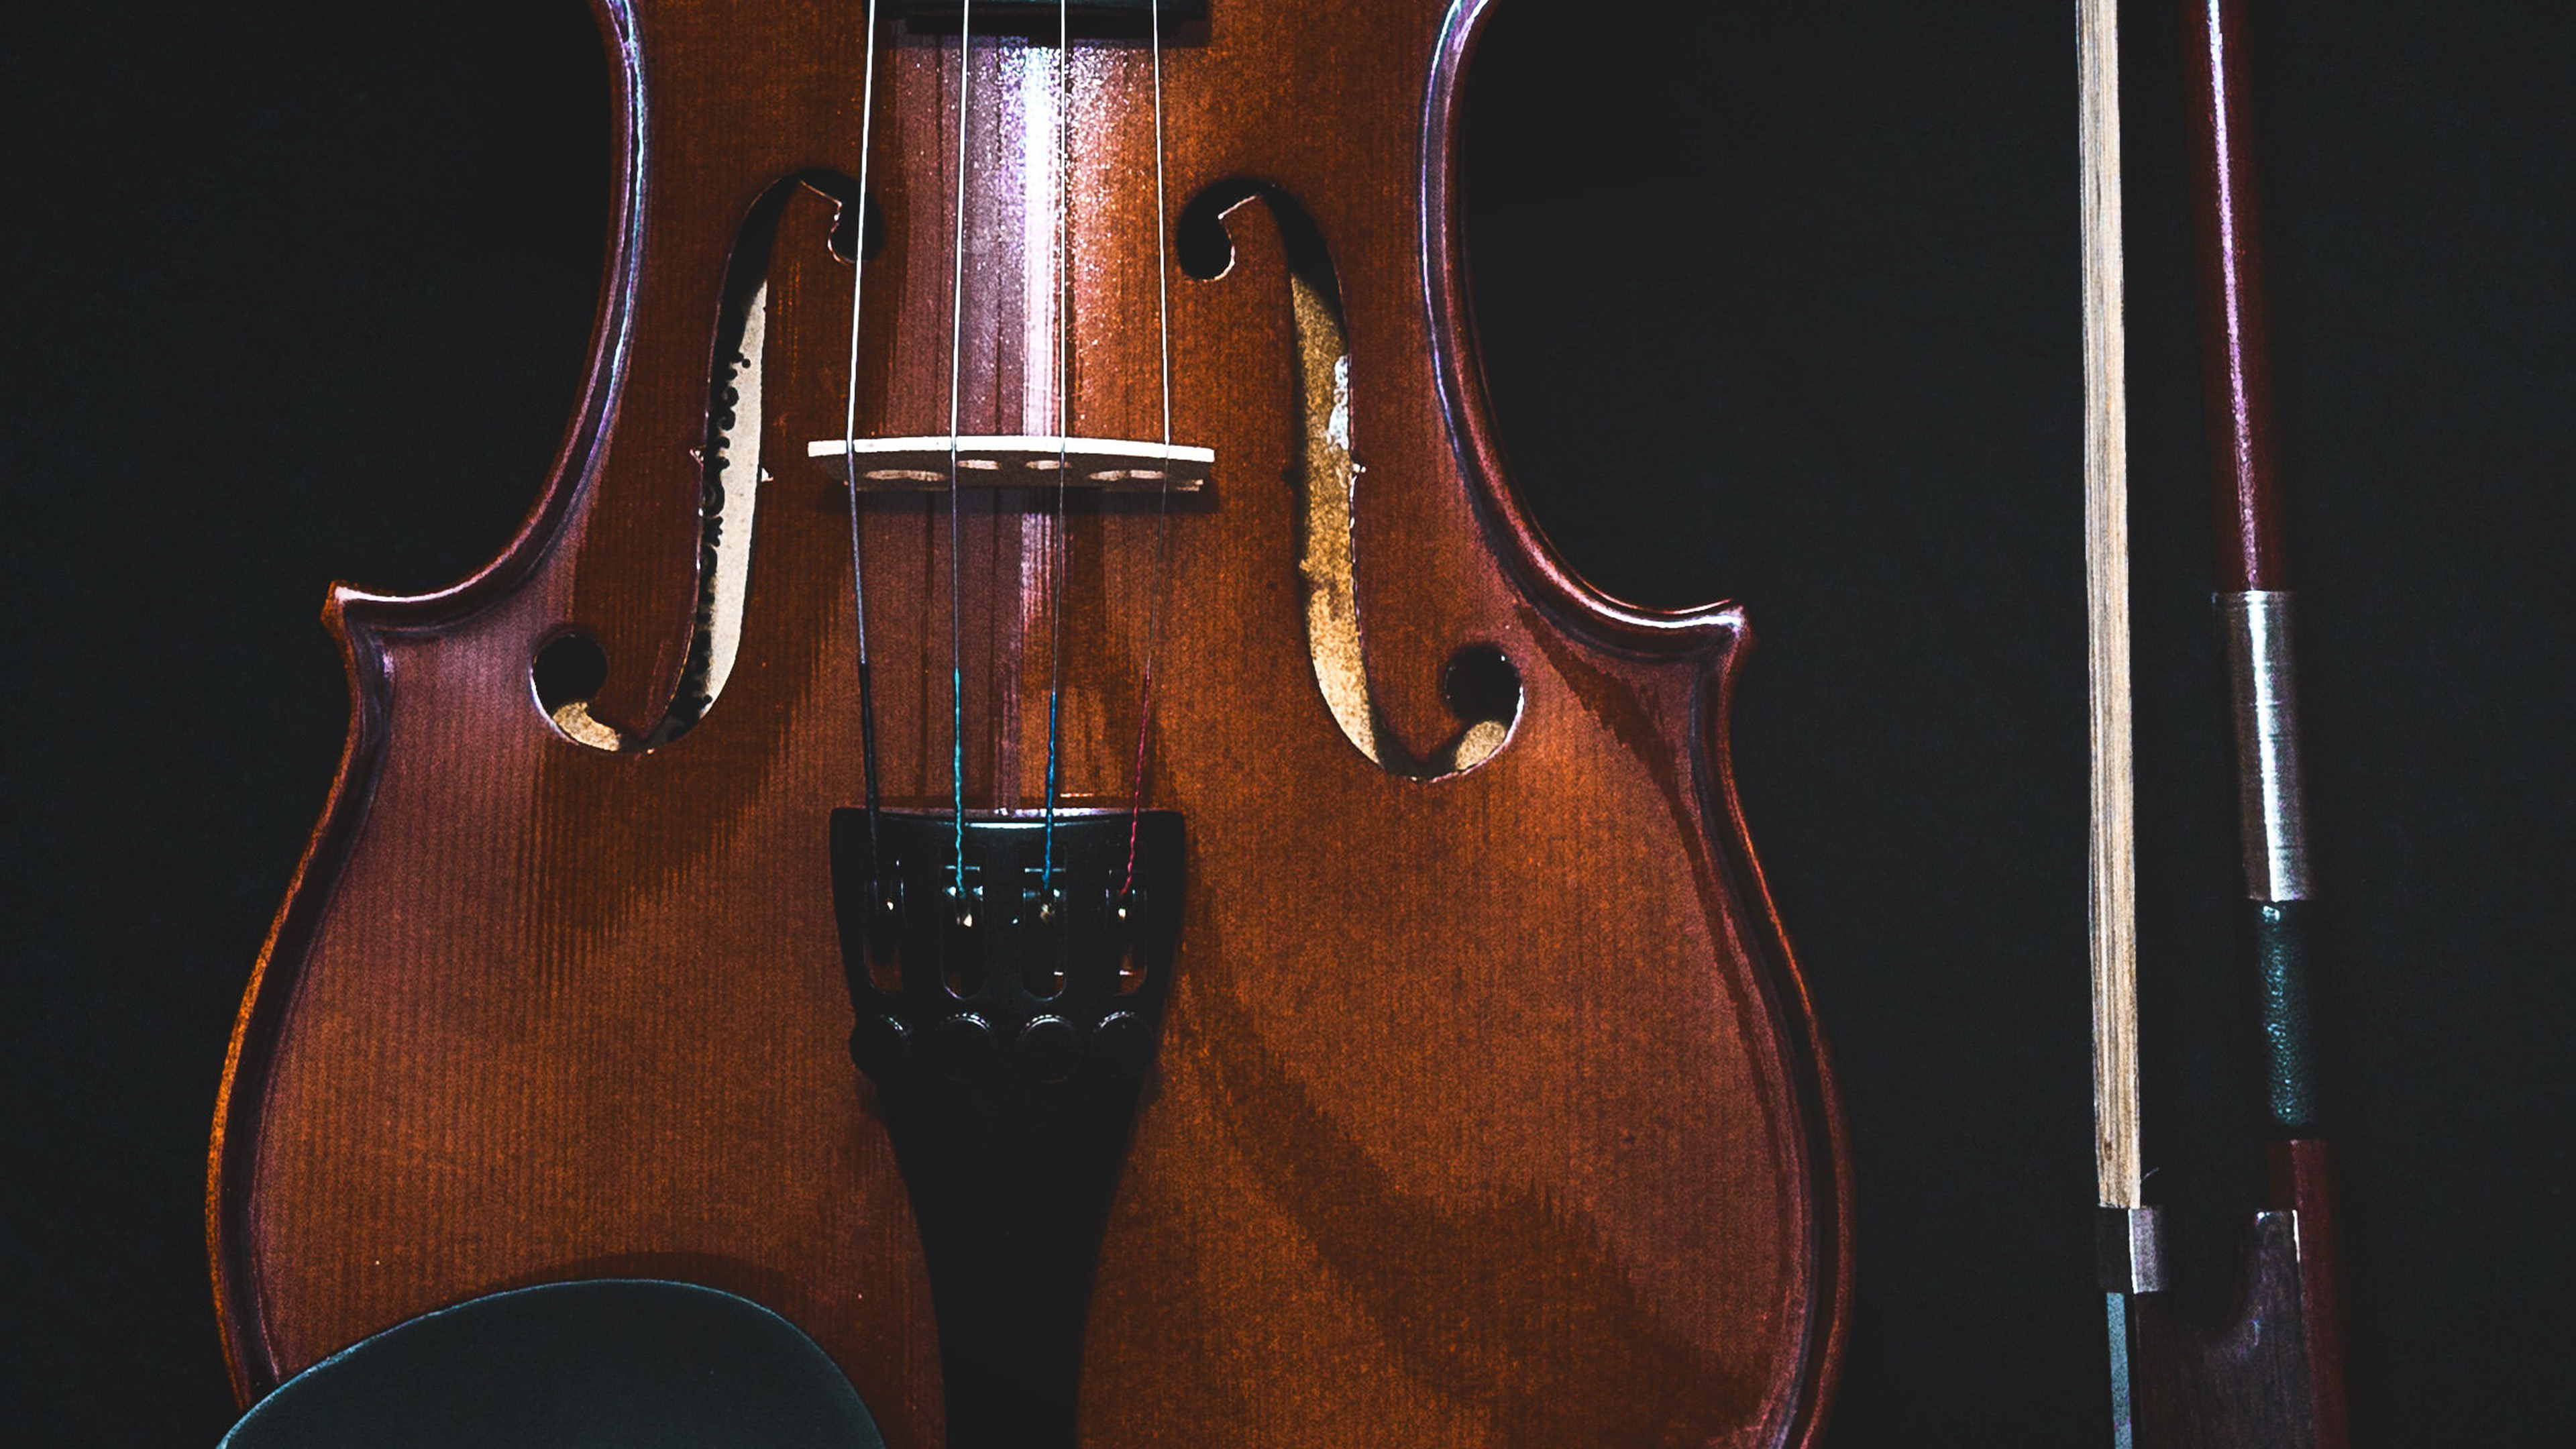 Viola: String Instrument That Is Bowed, Plucked, Or Played With Varying Techniques, Violin Family. 3840x2160 4K Background.